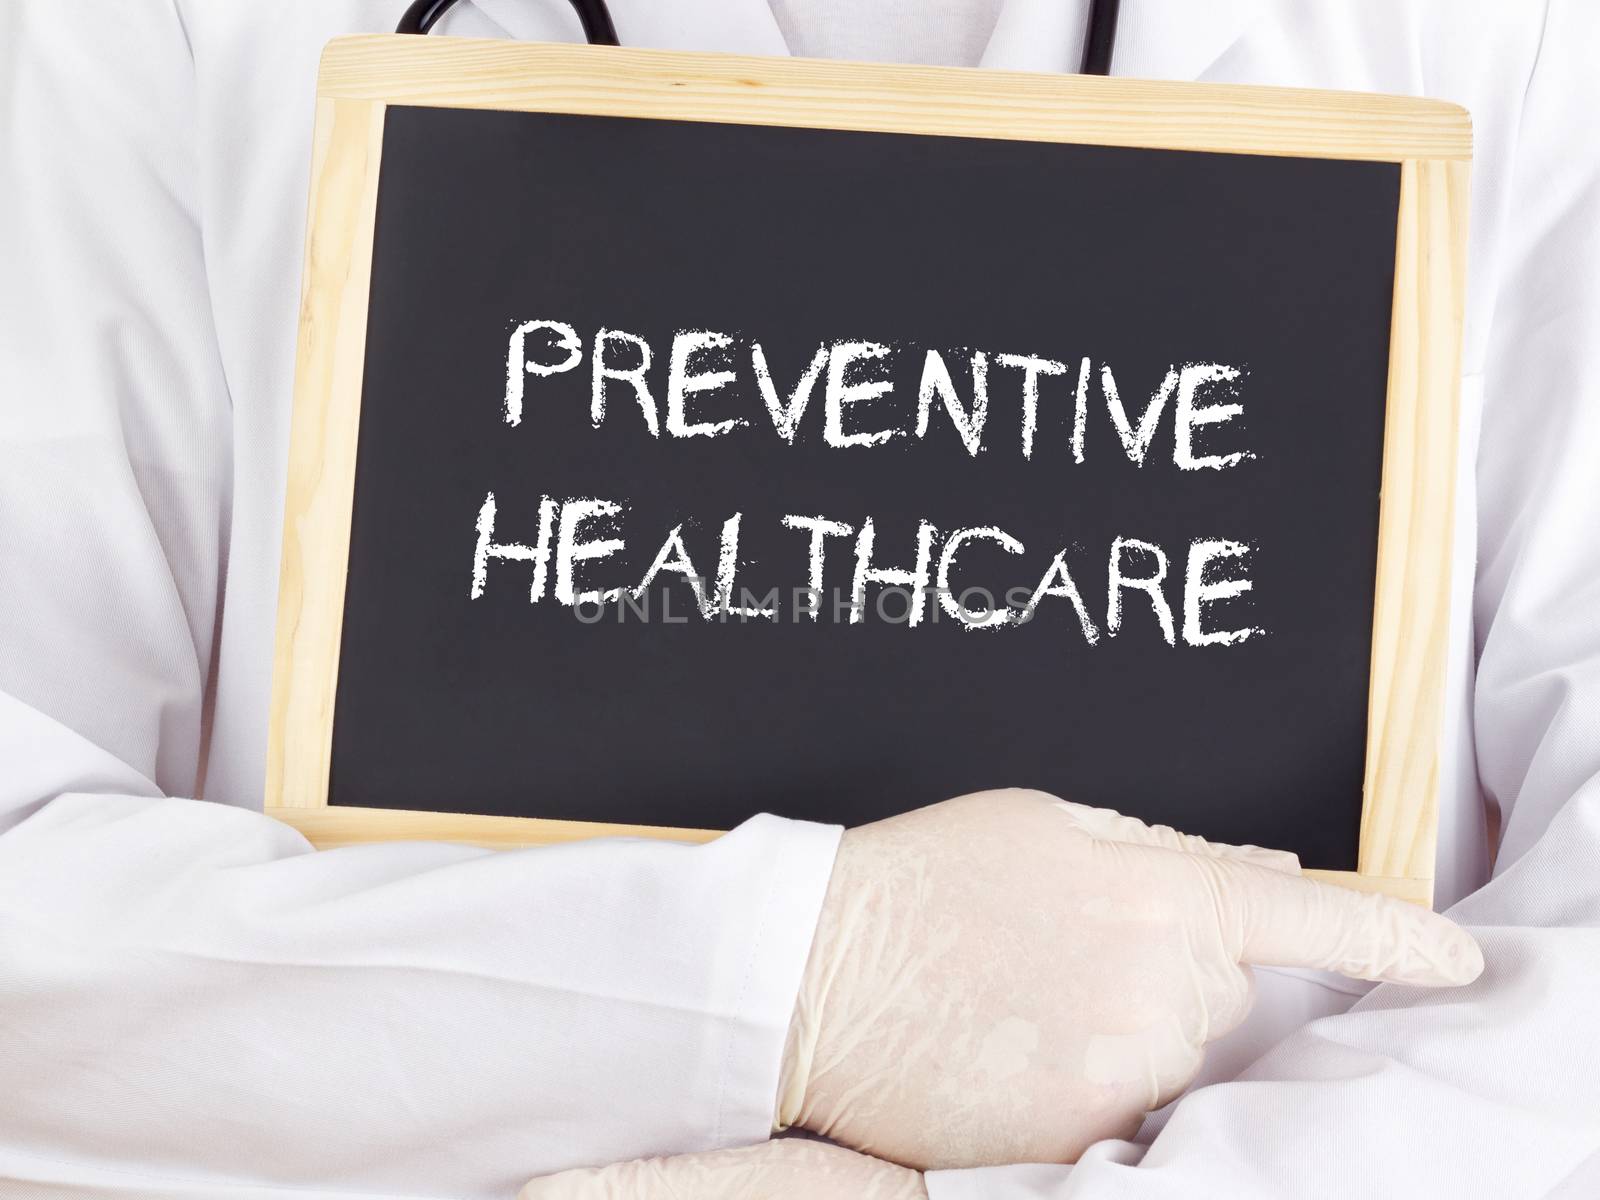 Doctor shows information: preventive healthcare by gwolters